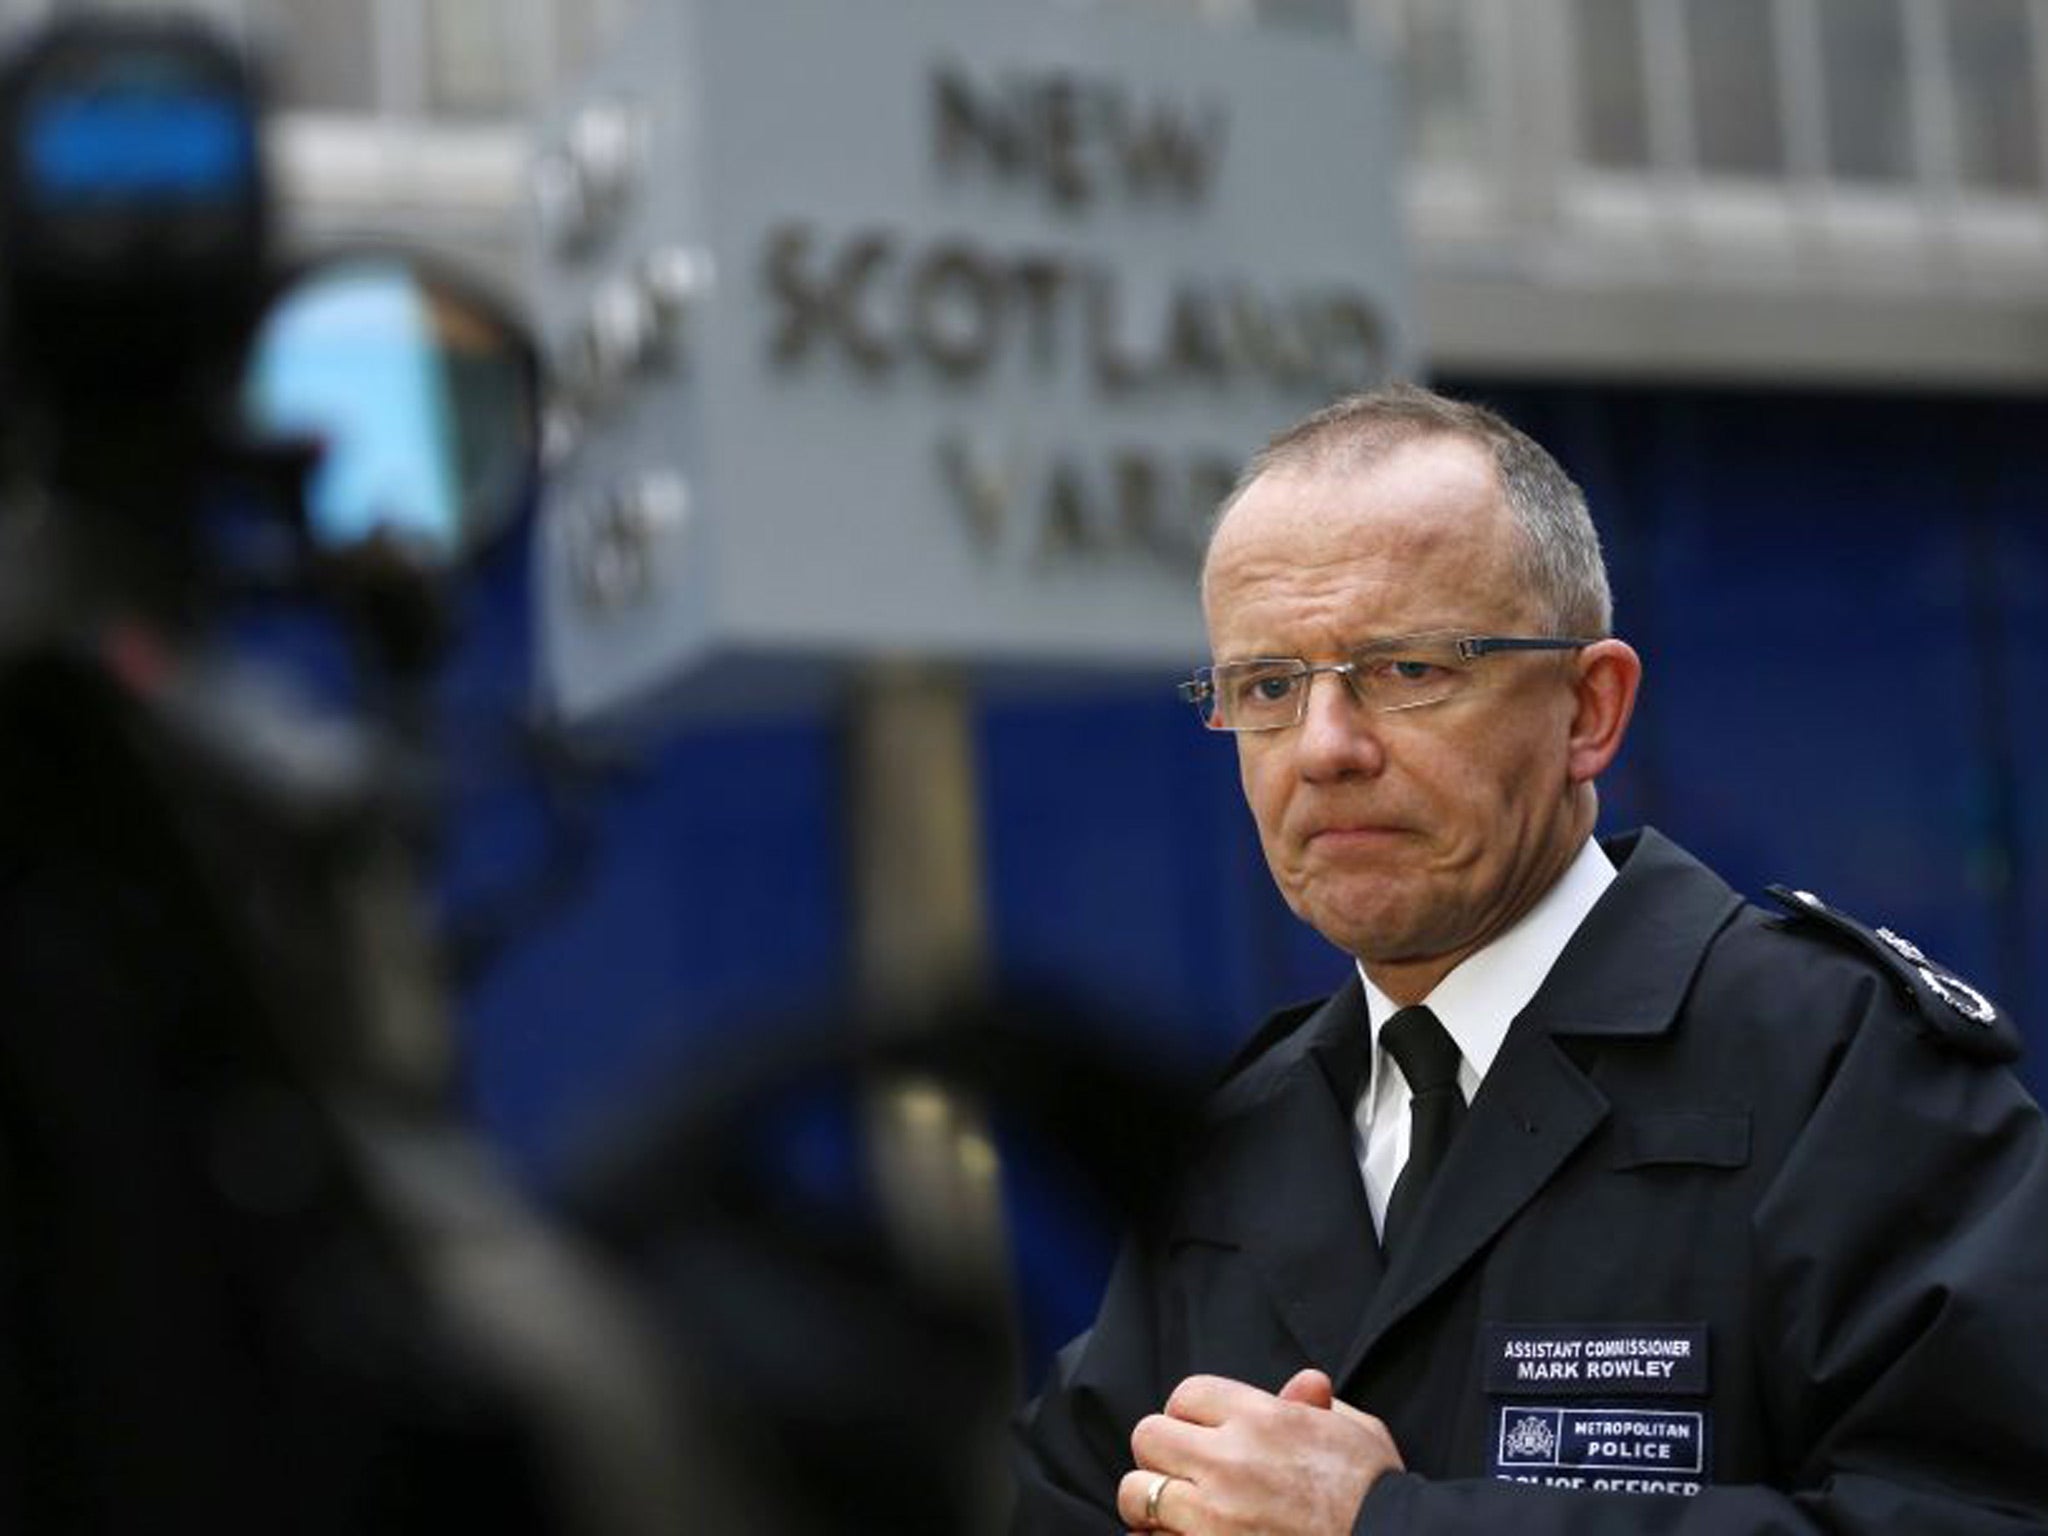 Metropolitan Police Assistant Commissioner Mark Rowley speaks to the media outside New Scotland Yard on Thursday